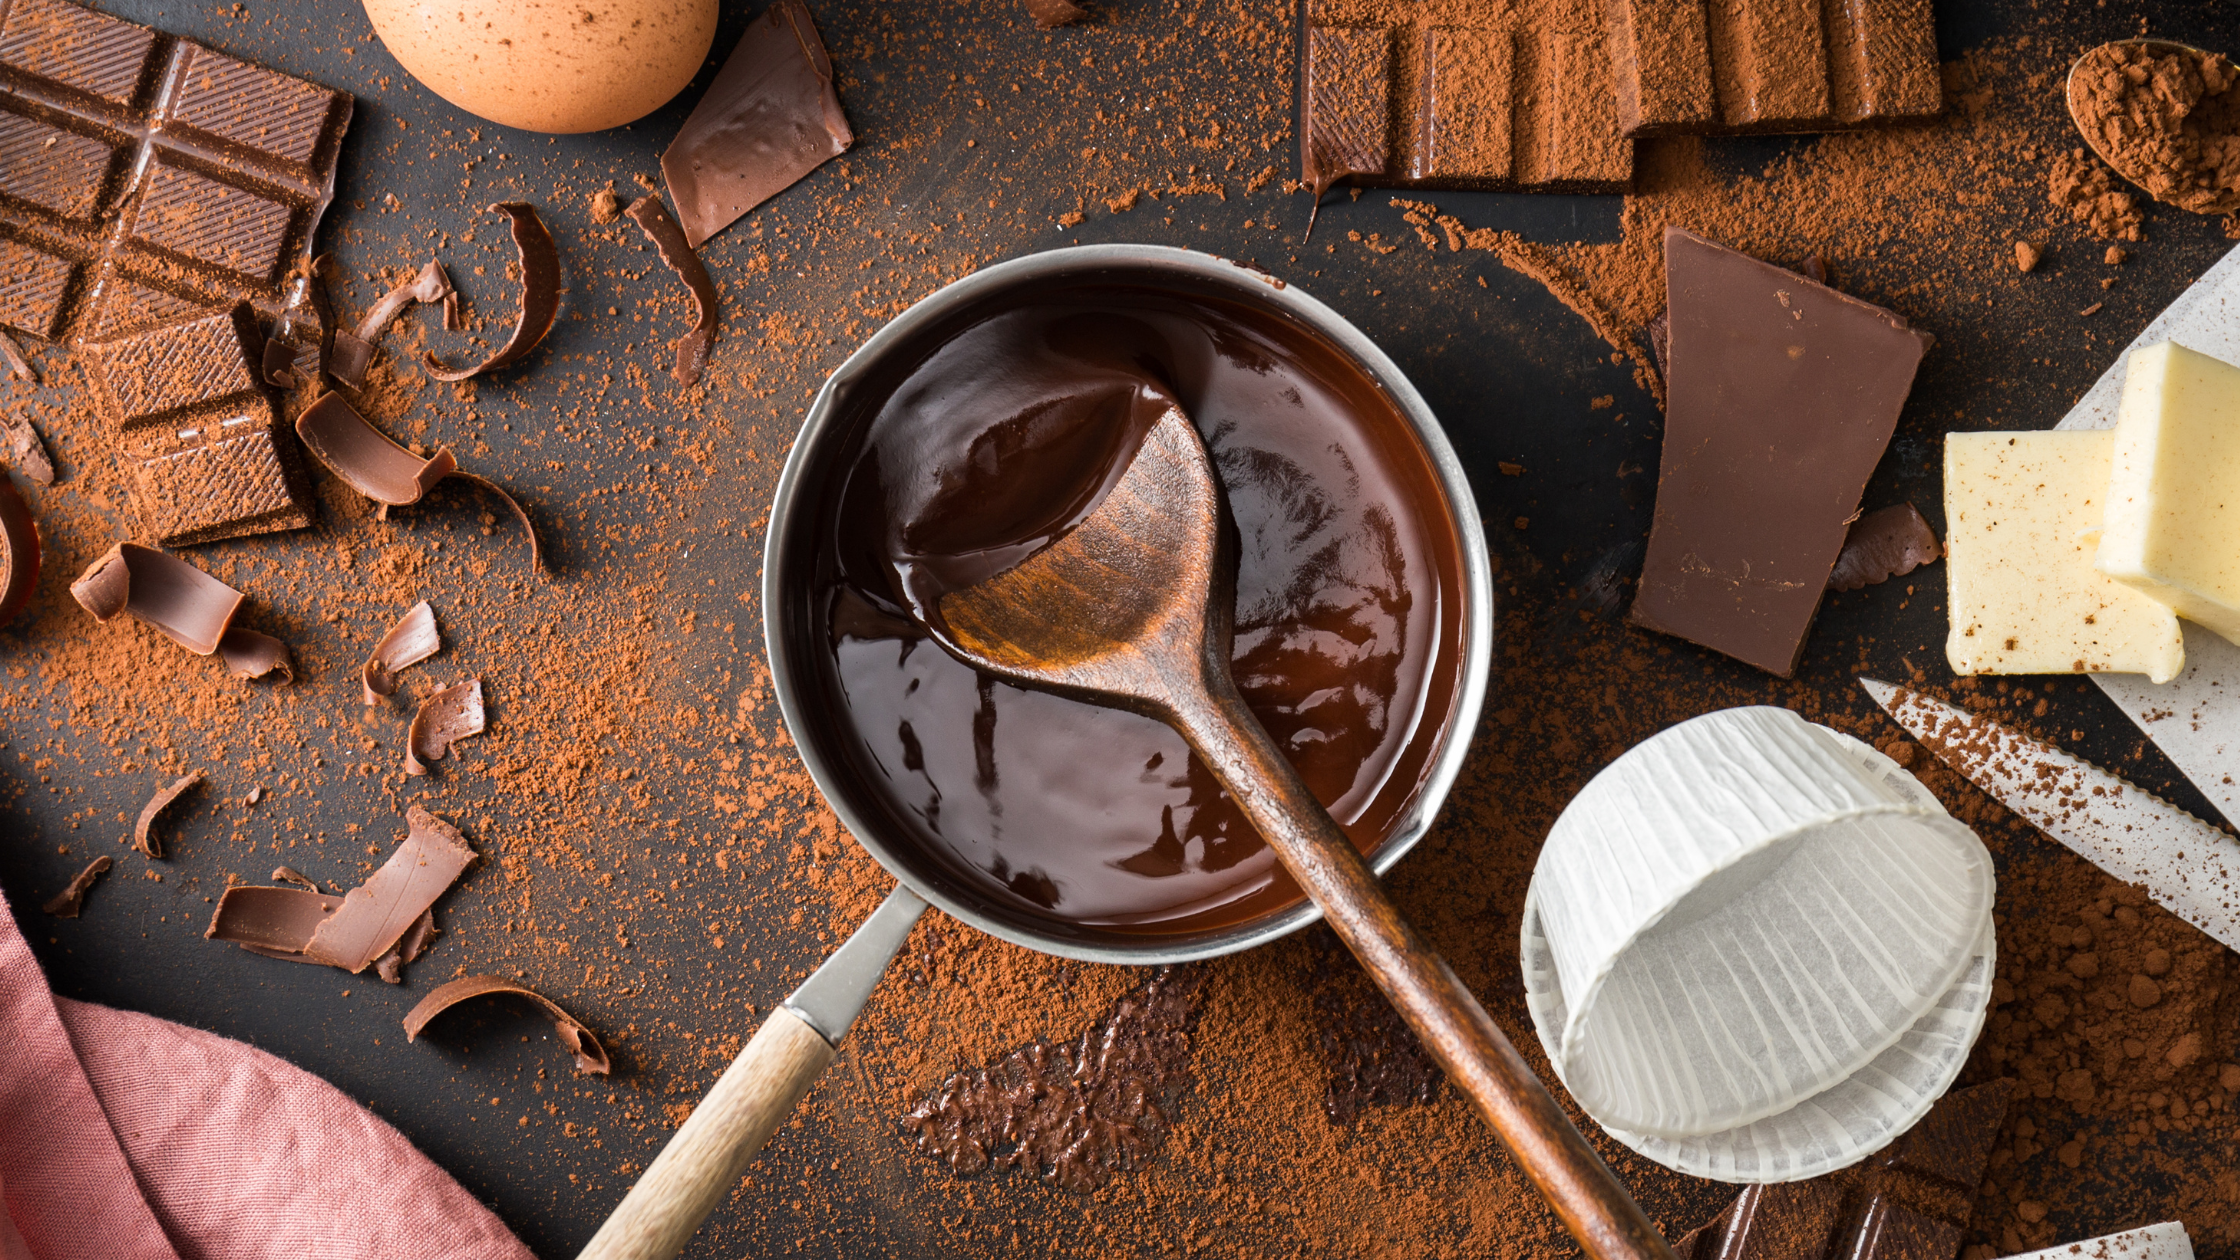 A Sweet History: How Chocolates Became An Integral Part Of Cooking And Baking